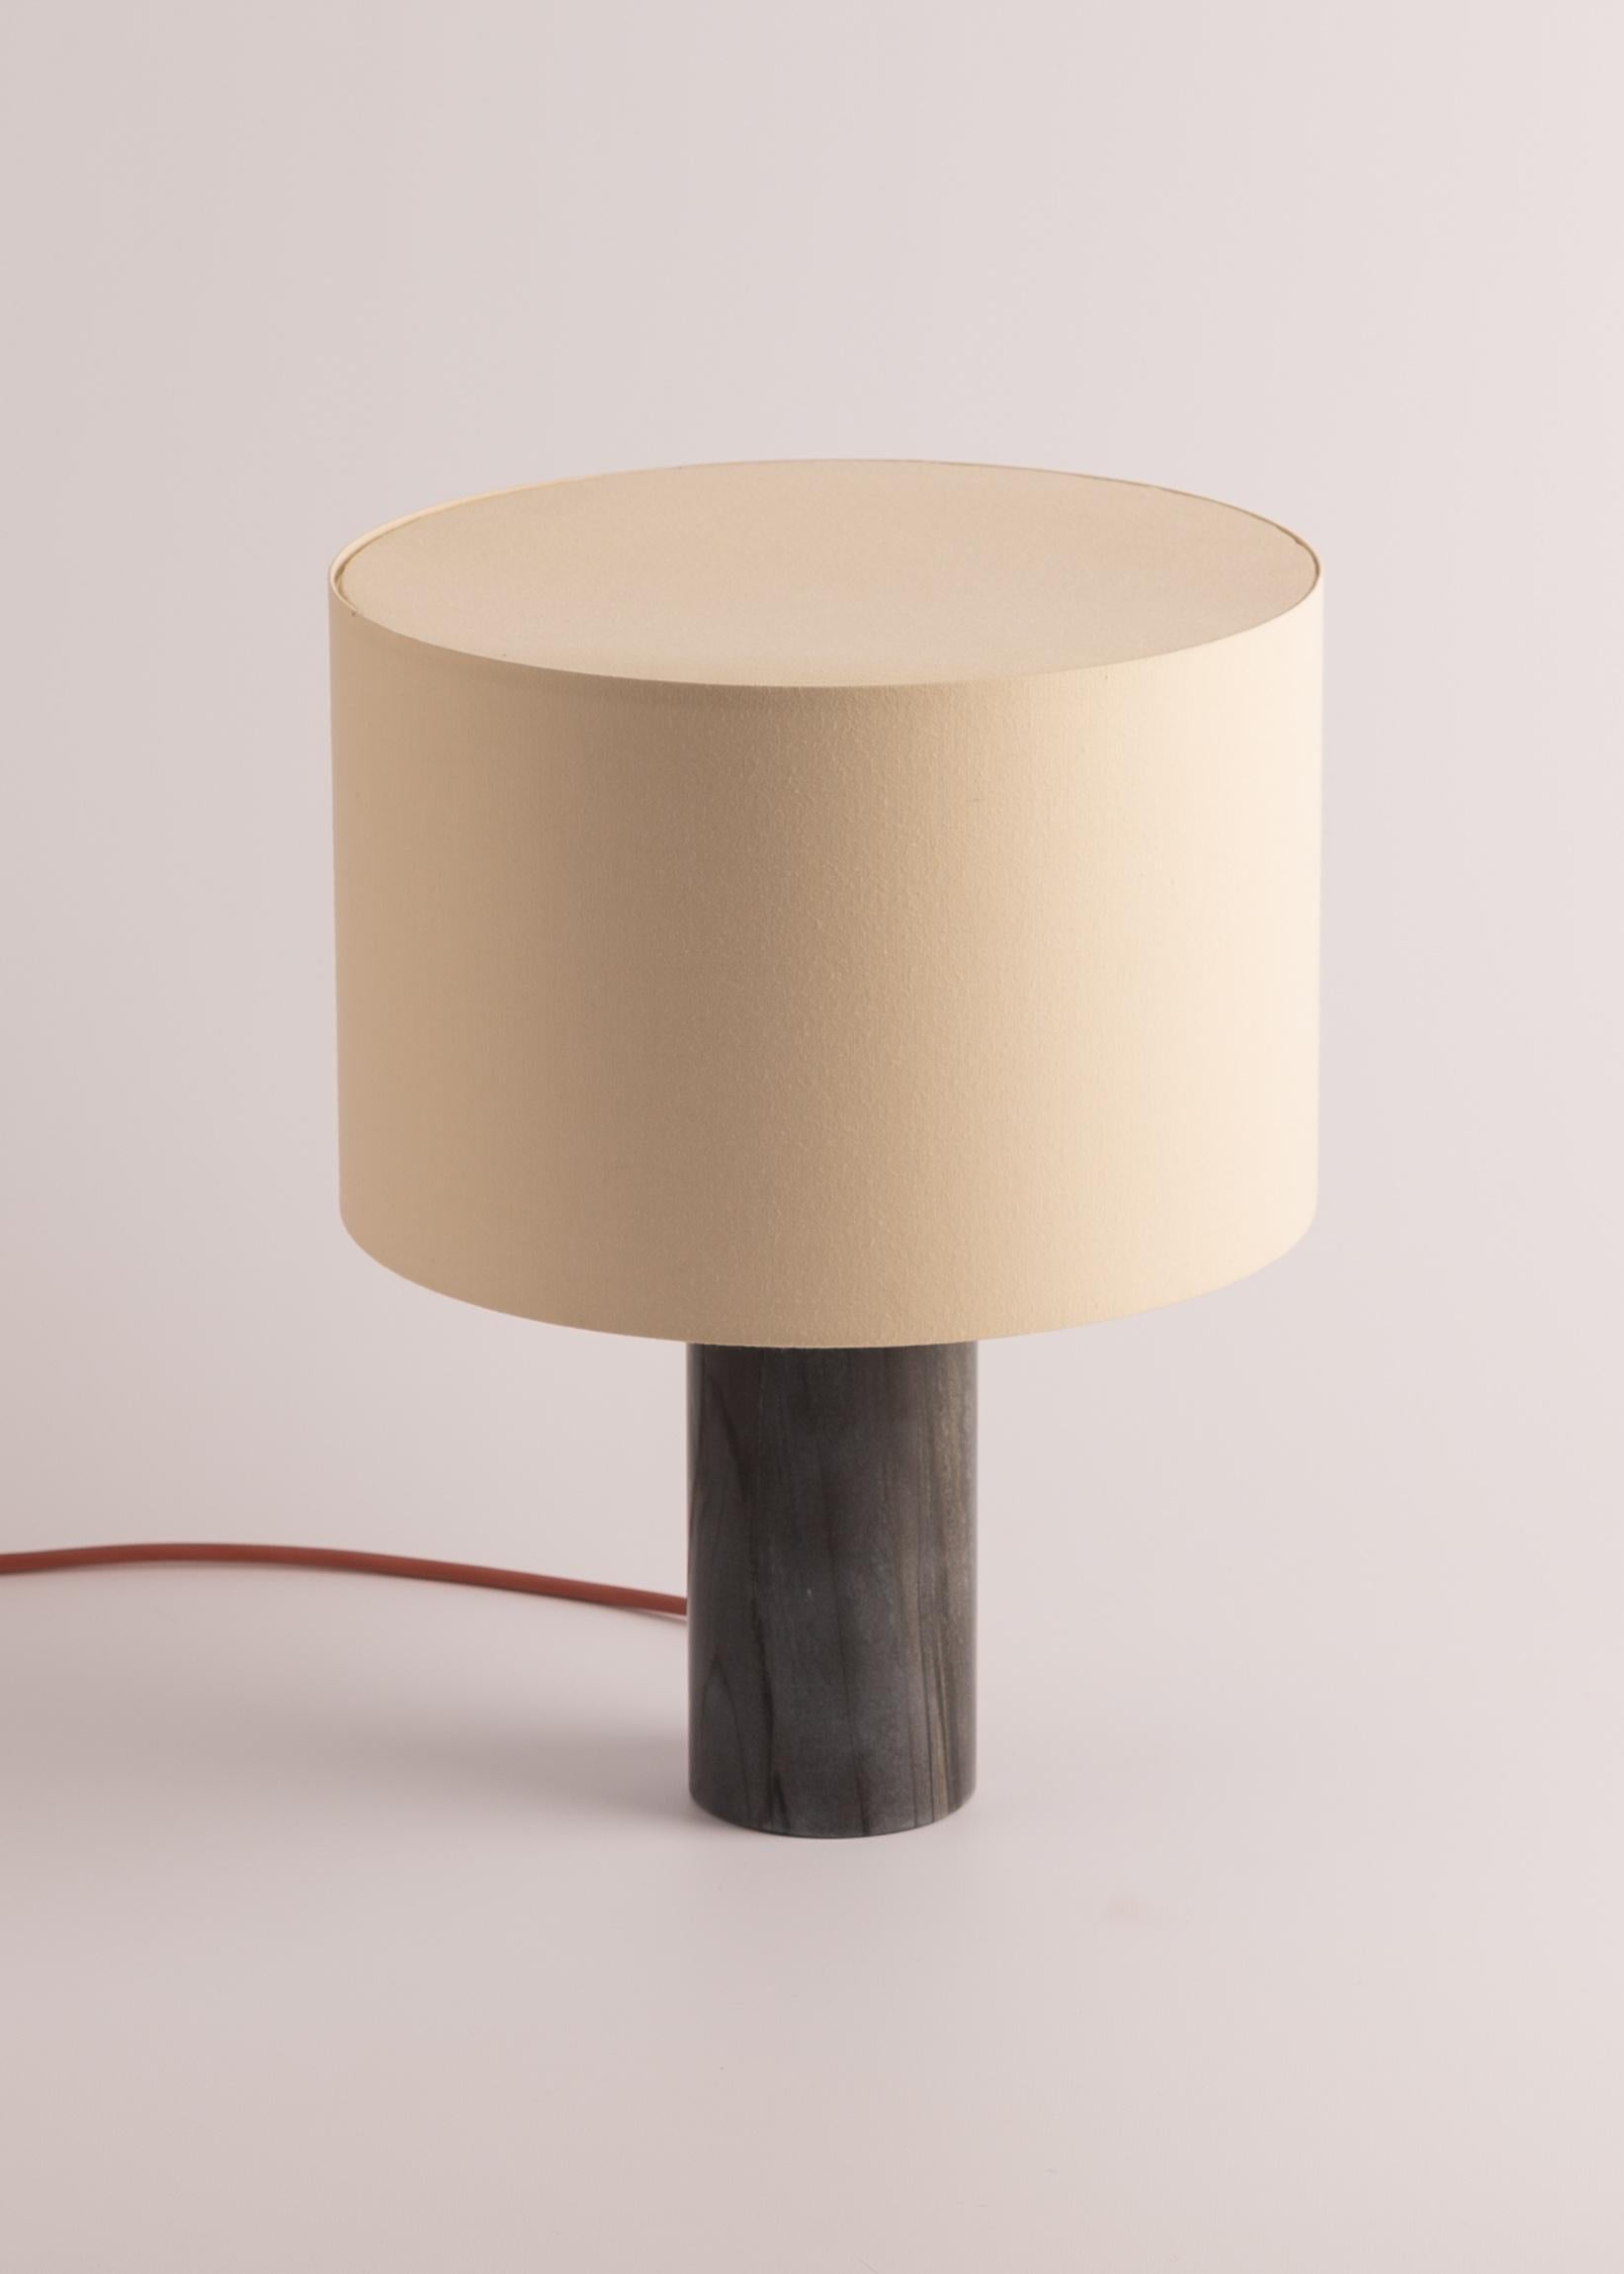 Black Marble Pipito Table Lamp by Simone & Marcel
Dimensions: Ø 30 x H 40 cm.
Materials: Cotton and black marble.

Also available in different marble and wood options and finishes. Custom options available on request. Please contact us. 

All our